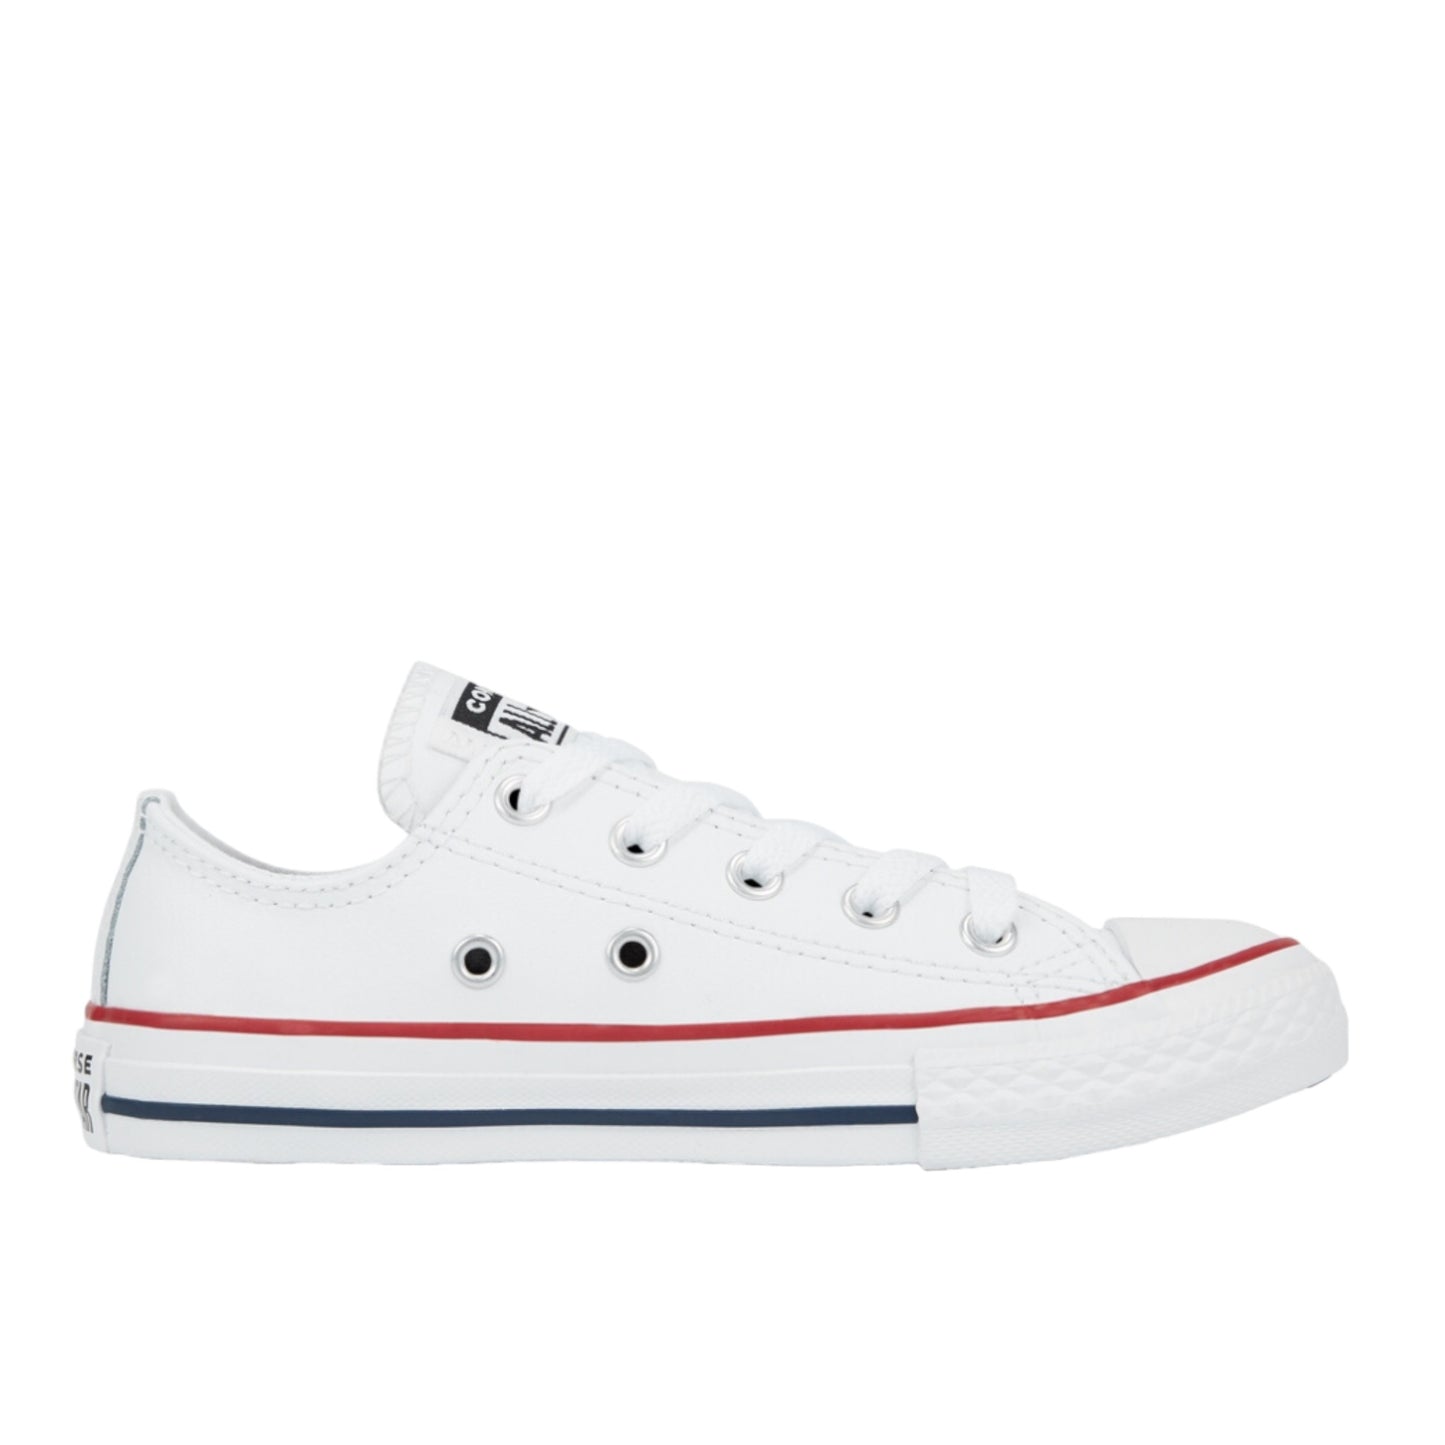 + Converse Chuck Taylor Youth All Star Low Leather - (335892C) - WHT LTH LO - R1L1